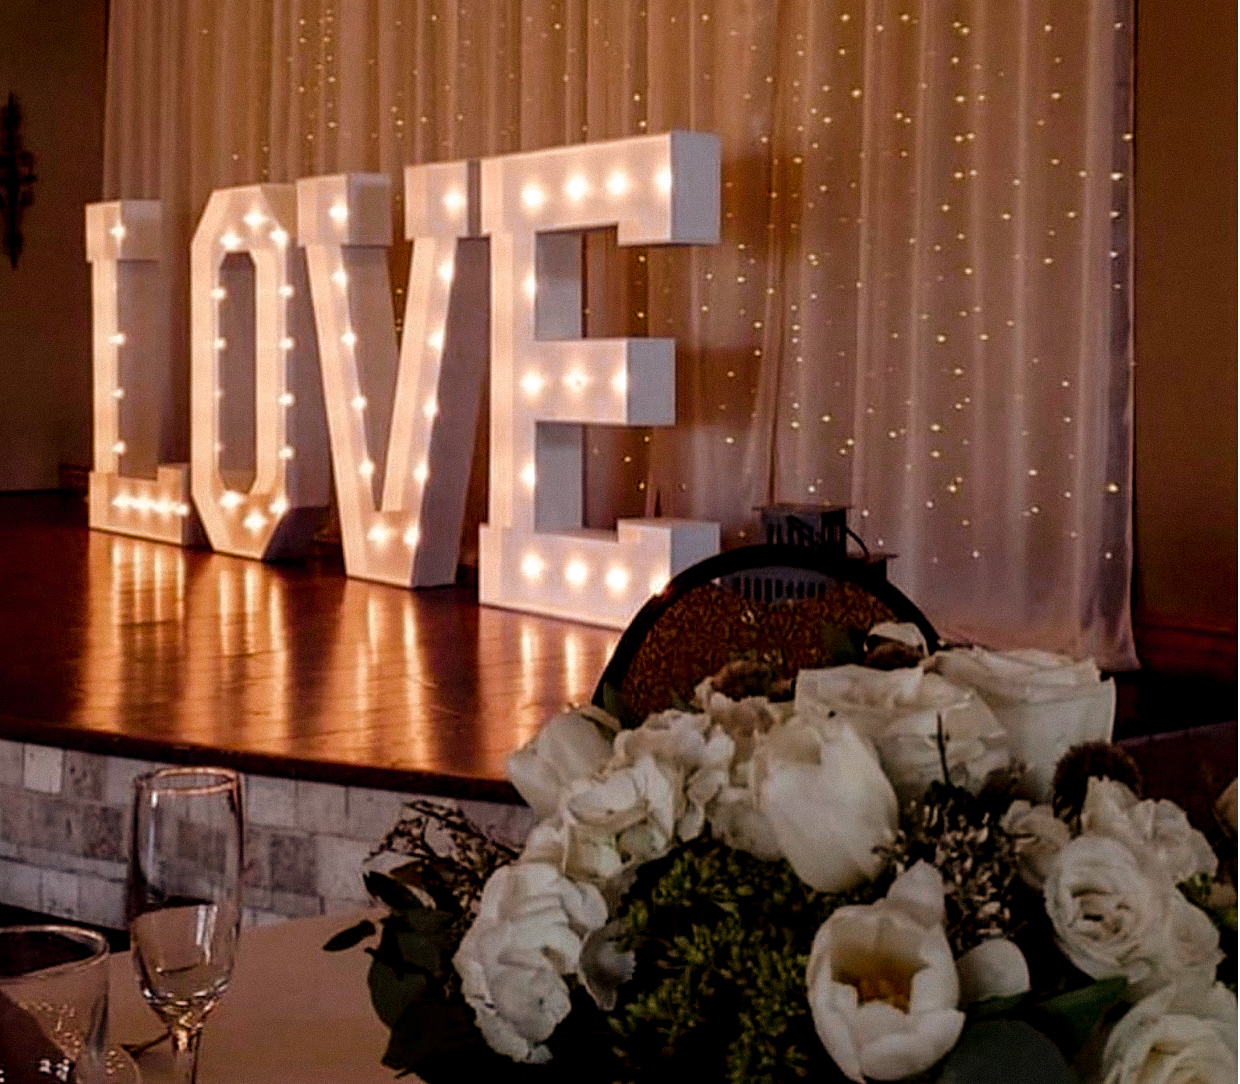 Napanee Wedding Marquee Letters